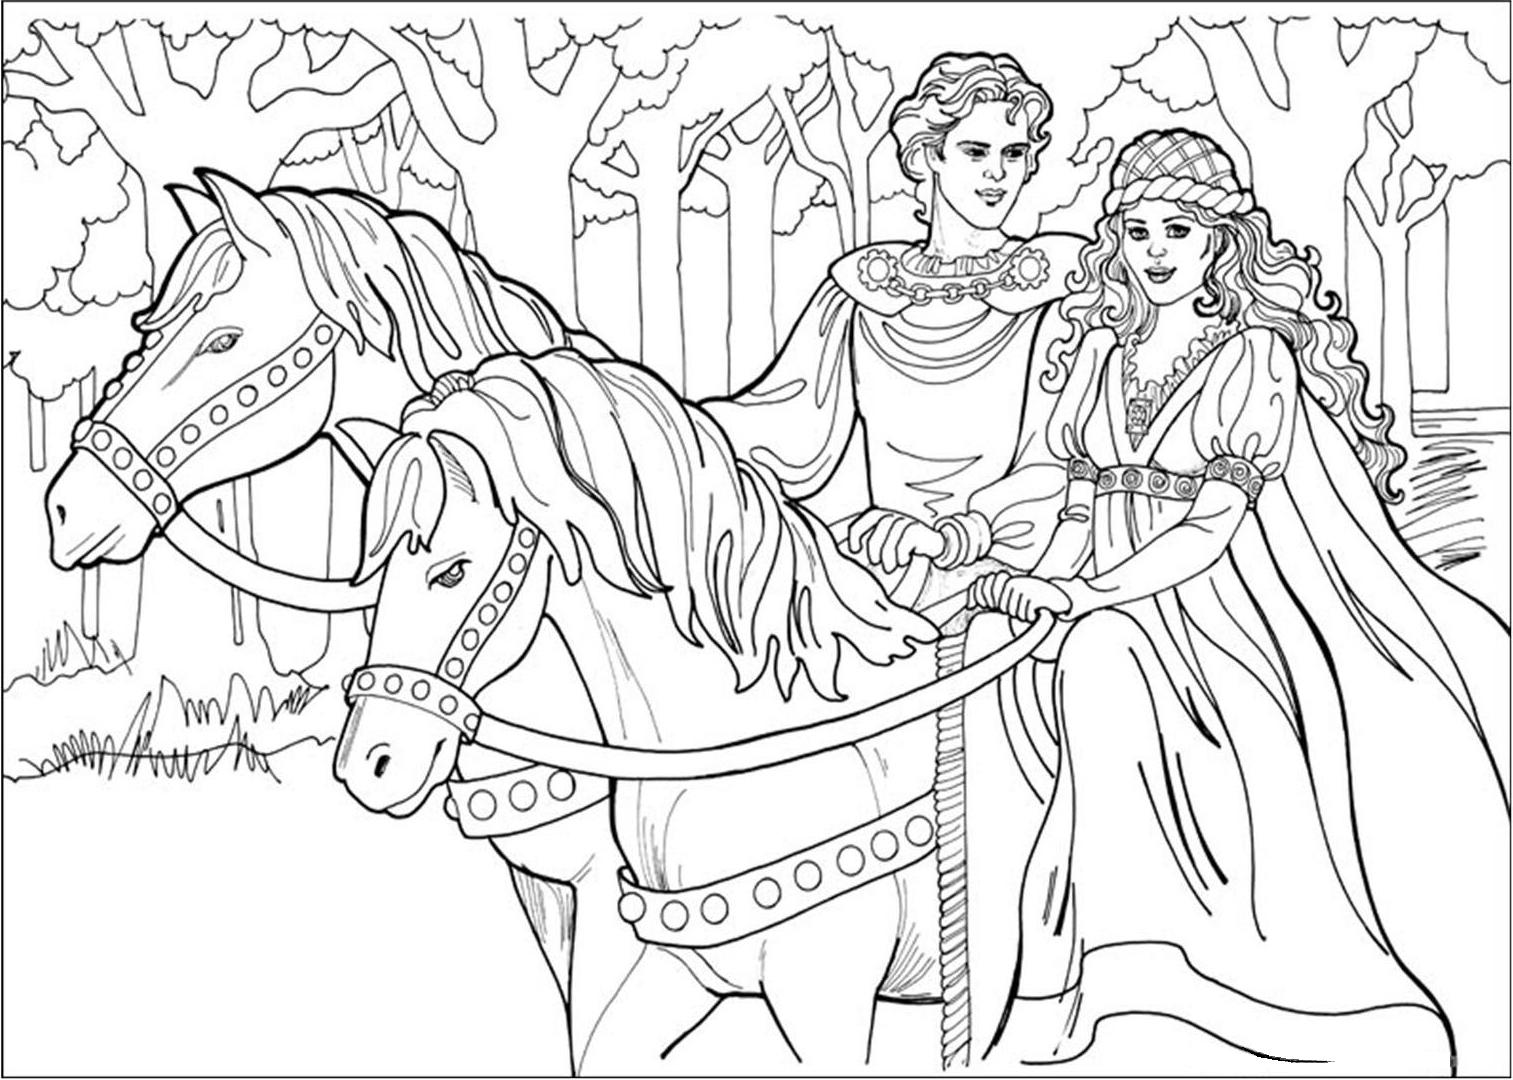 Coloring page: Horse (Animals) #2342 - Free Printable Coloring Pages